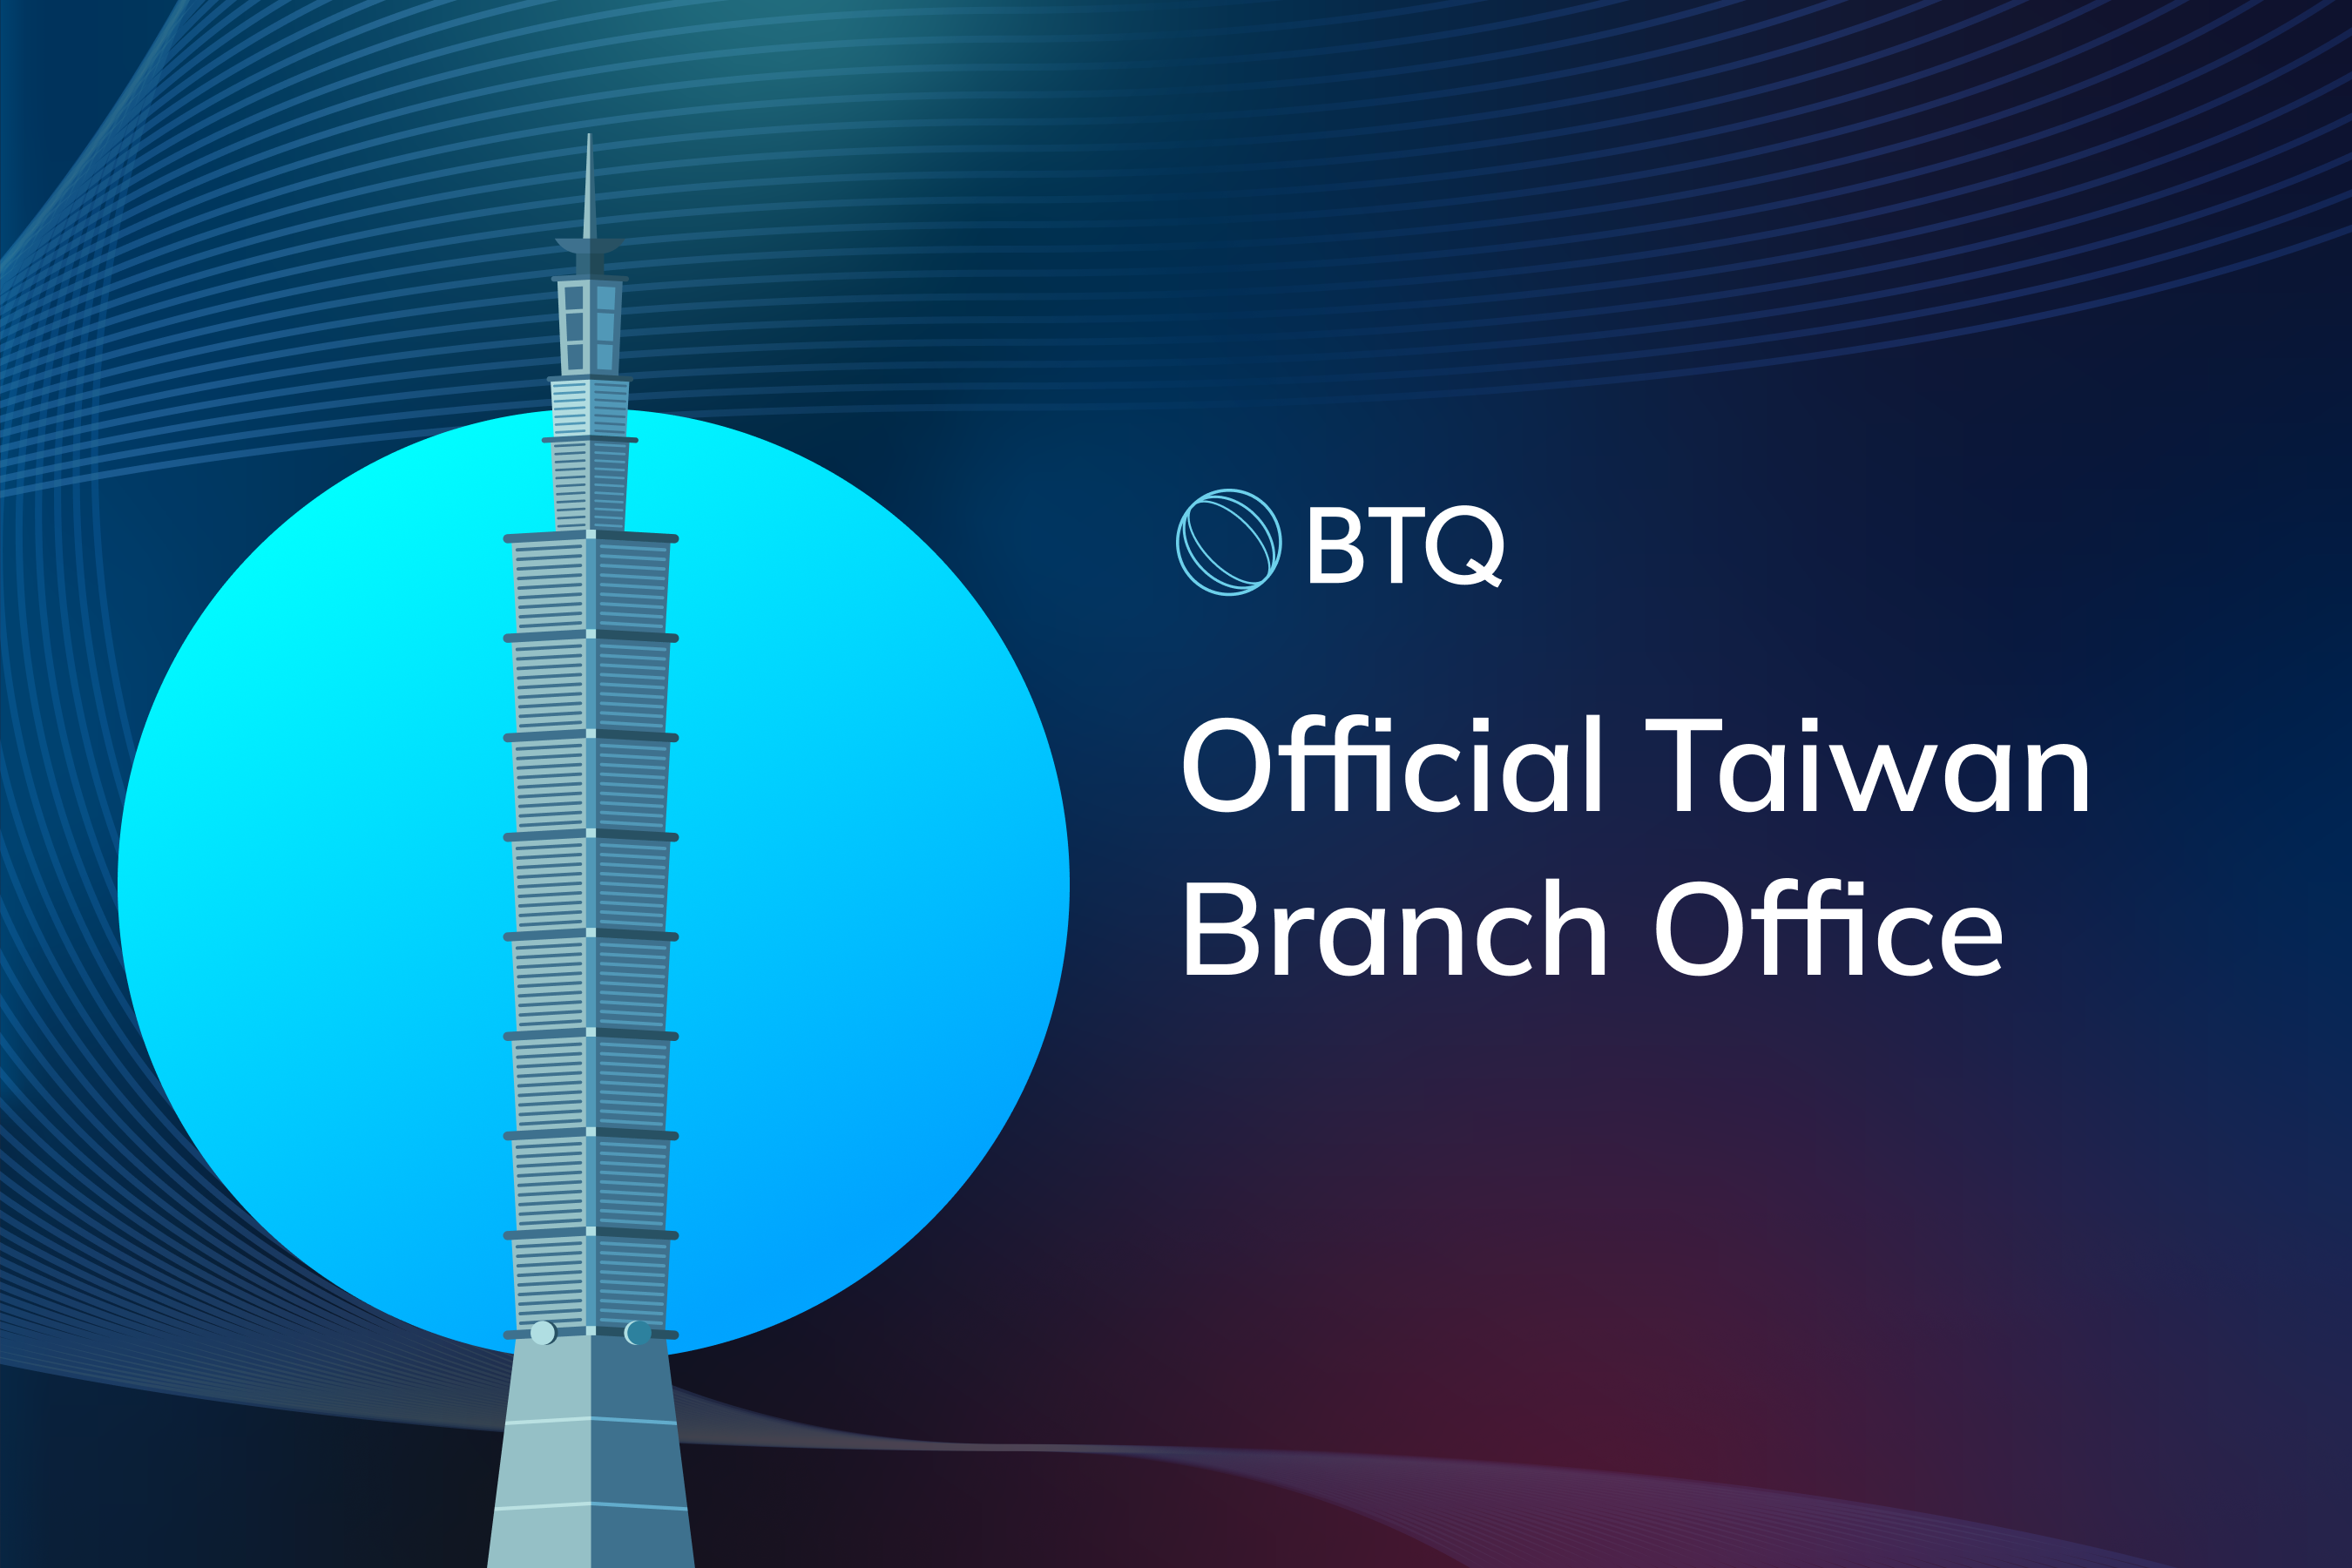 BTQ is happy to announce that the company has received government approval for the establishment of a branch office in Taiwan. While BTQ initially set up a representative office in 2021, our Taipei operations have grown considerably since then, and the transition to a branch office structure is the logical next step for the company. BTQ now has a bustling office in the heart of Taipei’s Zhongzheng district, and registering as a branch office of the parent company has expanded the scope of available business activities, which were somewhat more constrained for our previous representative office. By setting up a branch office in Taipei, BTQ has deepened its commitment to building next generation encryption technology within Taiwan’s world-class semiconductor ecosystem, with an ever-growing IP portfolio generated by Taiwan’s brightest talents in the field of post-quantum cryptography. With additional offices in Australia and Liechtenstein and collaborations with high-level research institutions including Taiwan’s ITRI, BTQ is now poised to take the lead in bringing quantum secure technology to the global market.